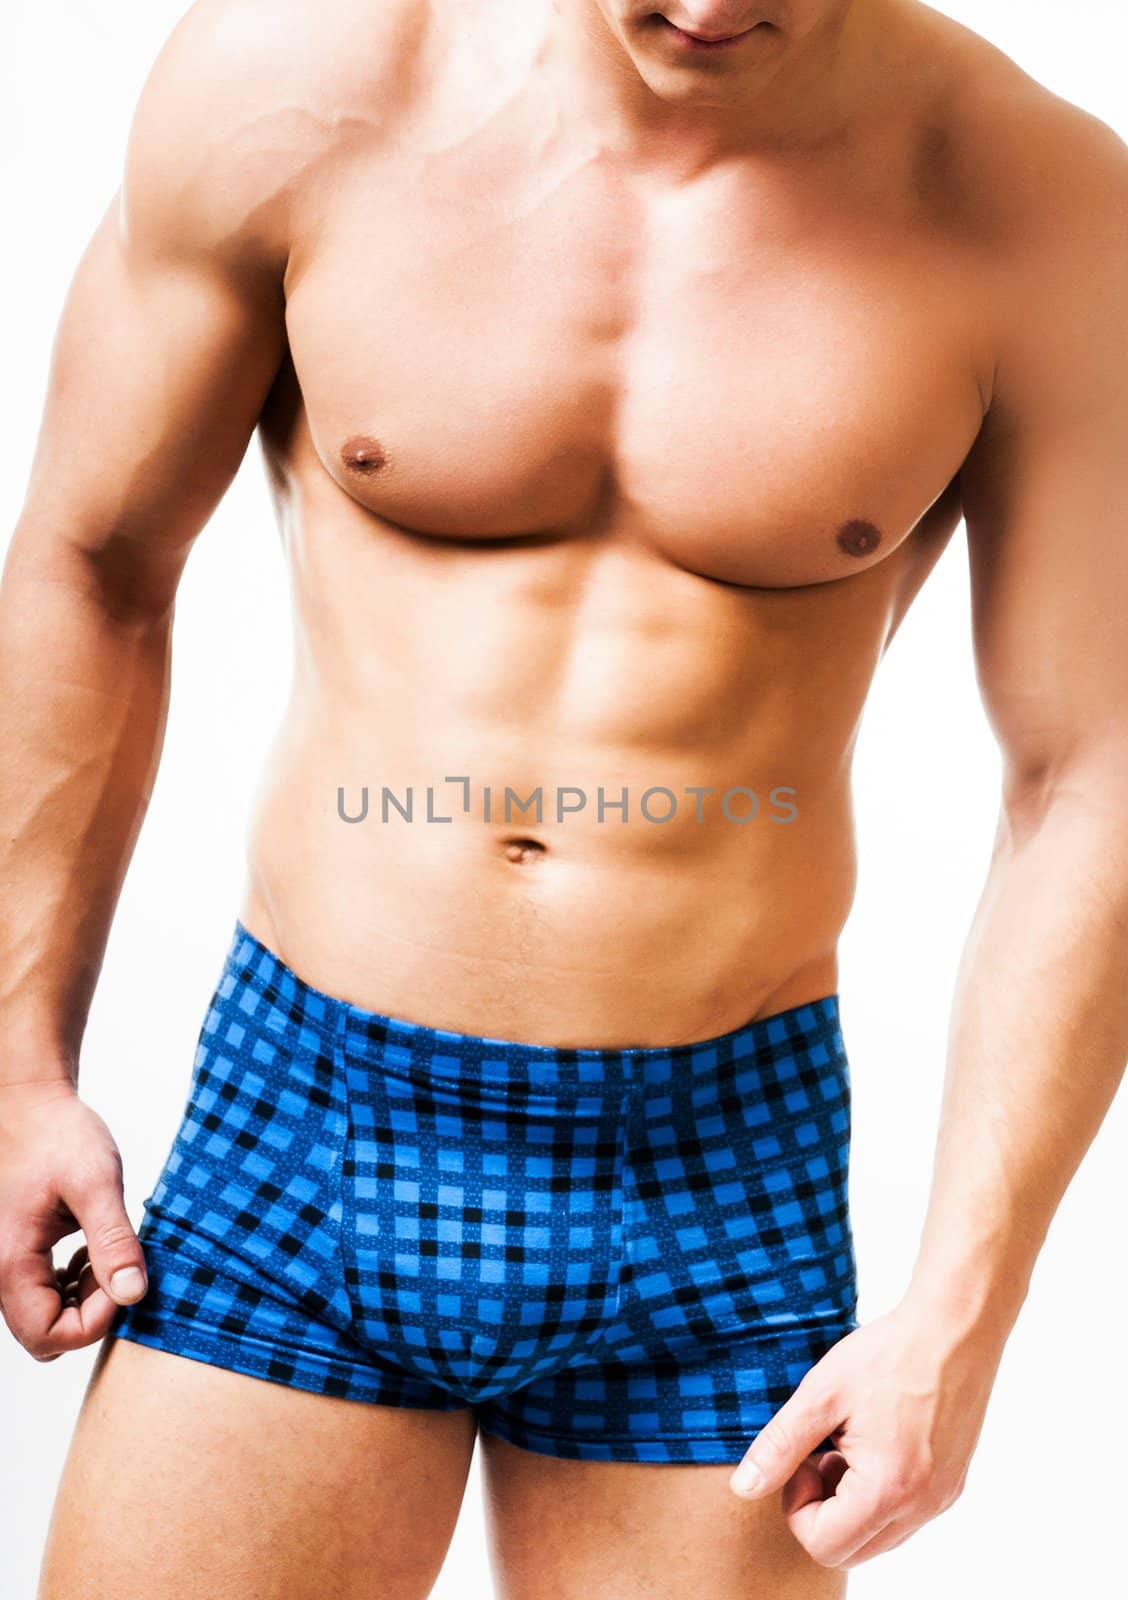 athletic man on a white background